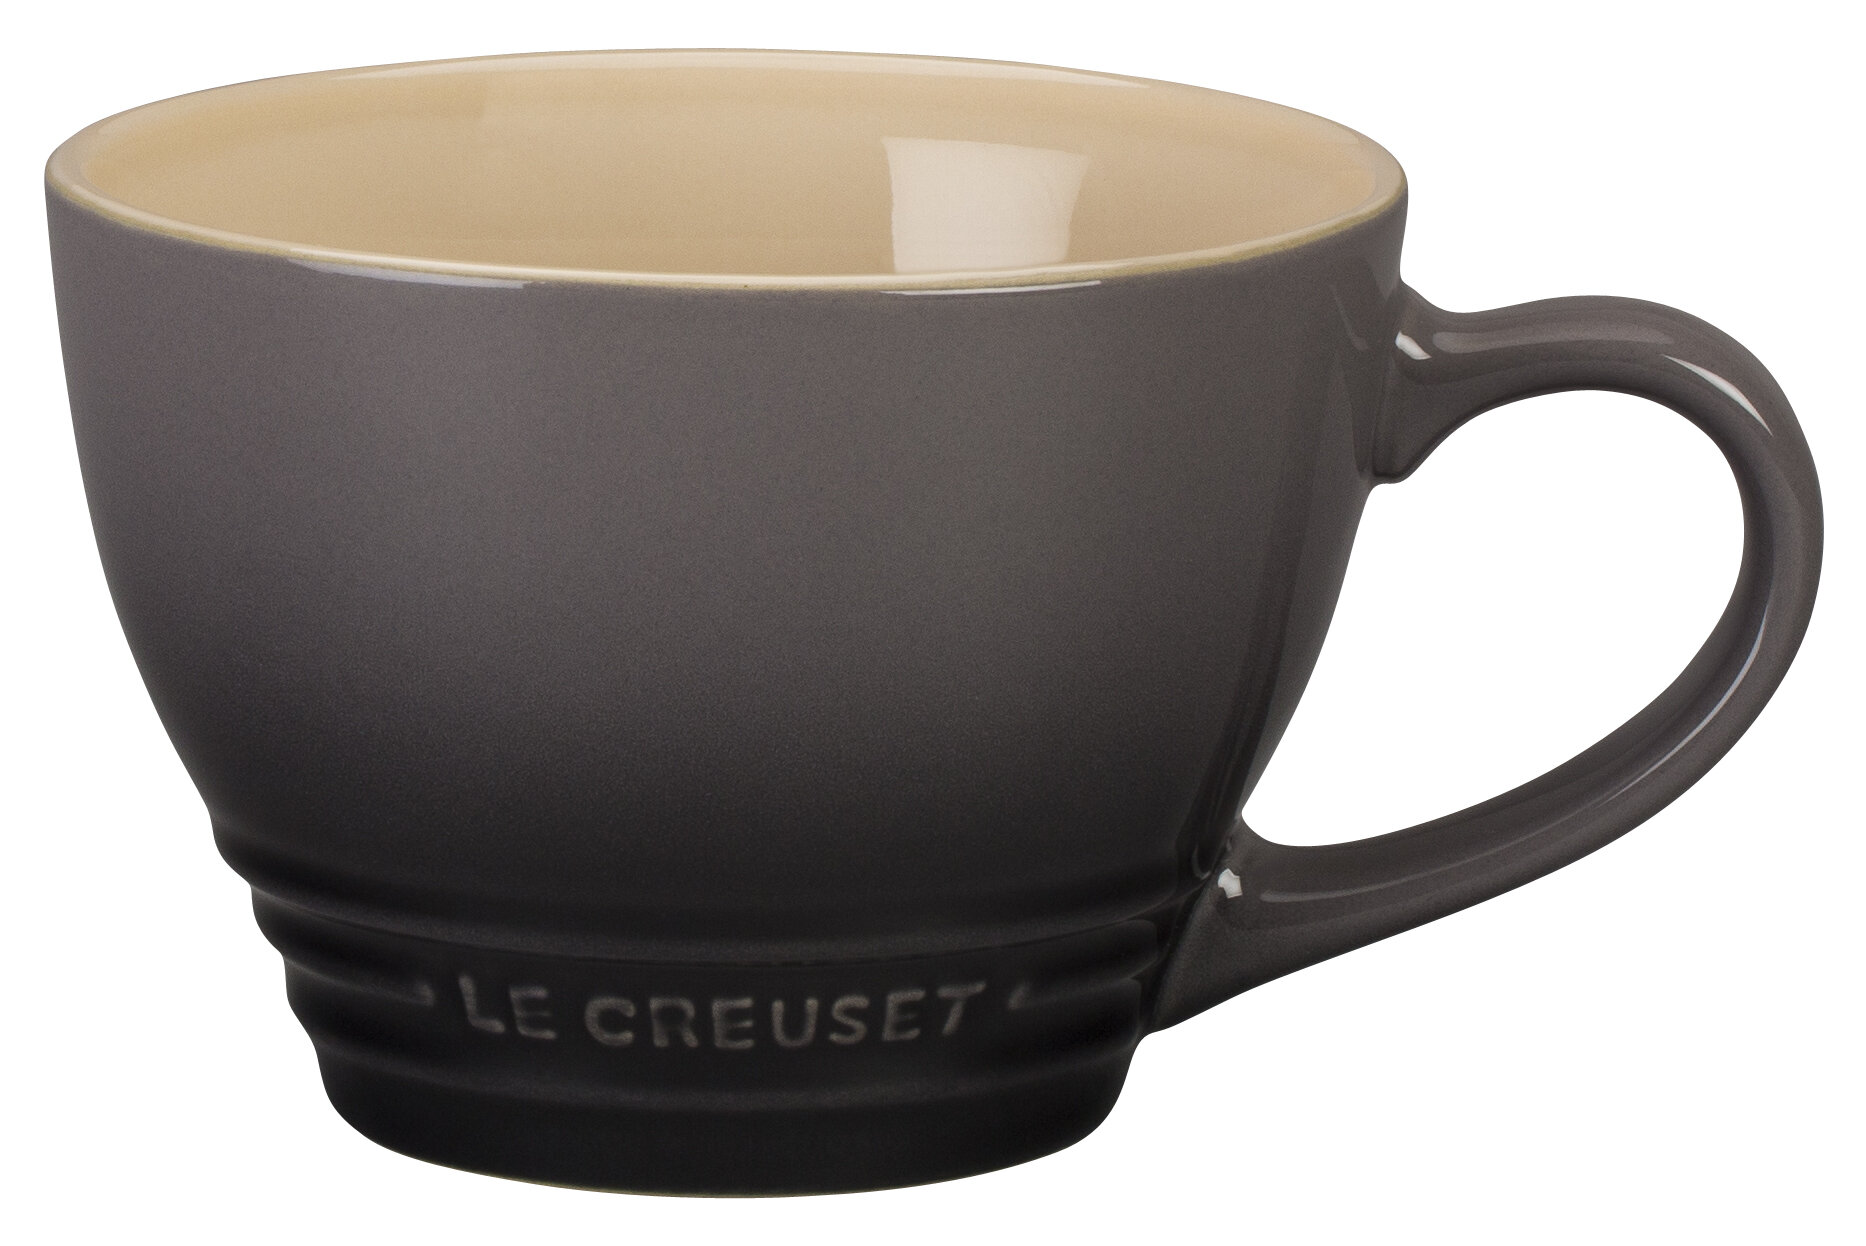 Le Creuset Stoneware Set of 2 Cappuccino Cups and Saucers , 7 oz. each,  Marseille